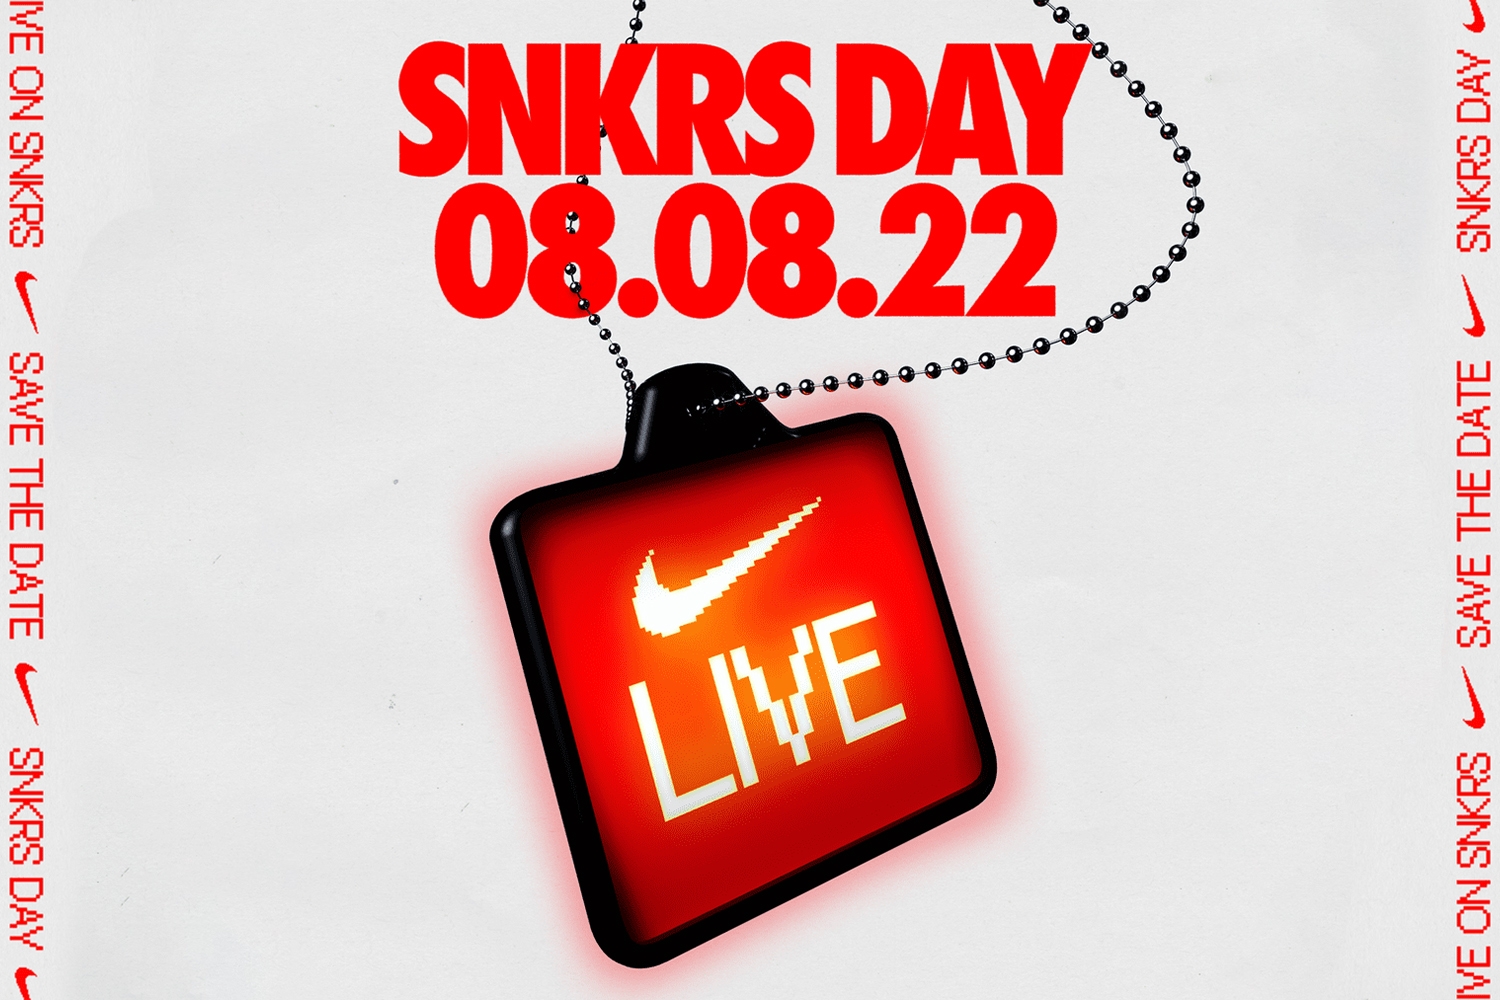 In augustus viert Nike SNKRS Day 2022